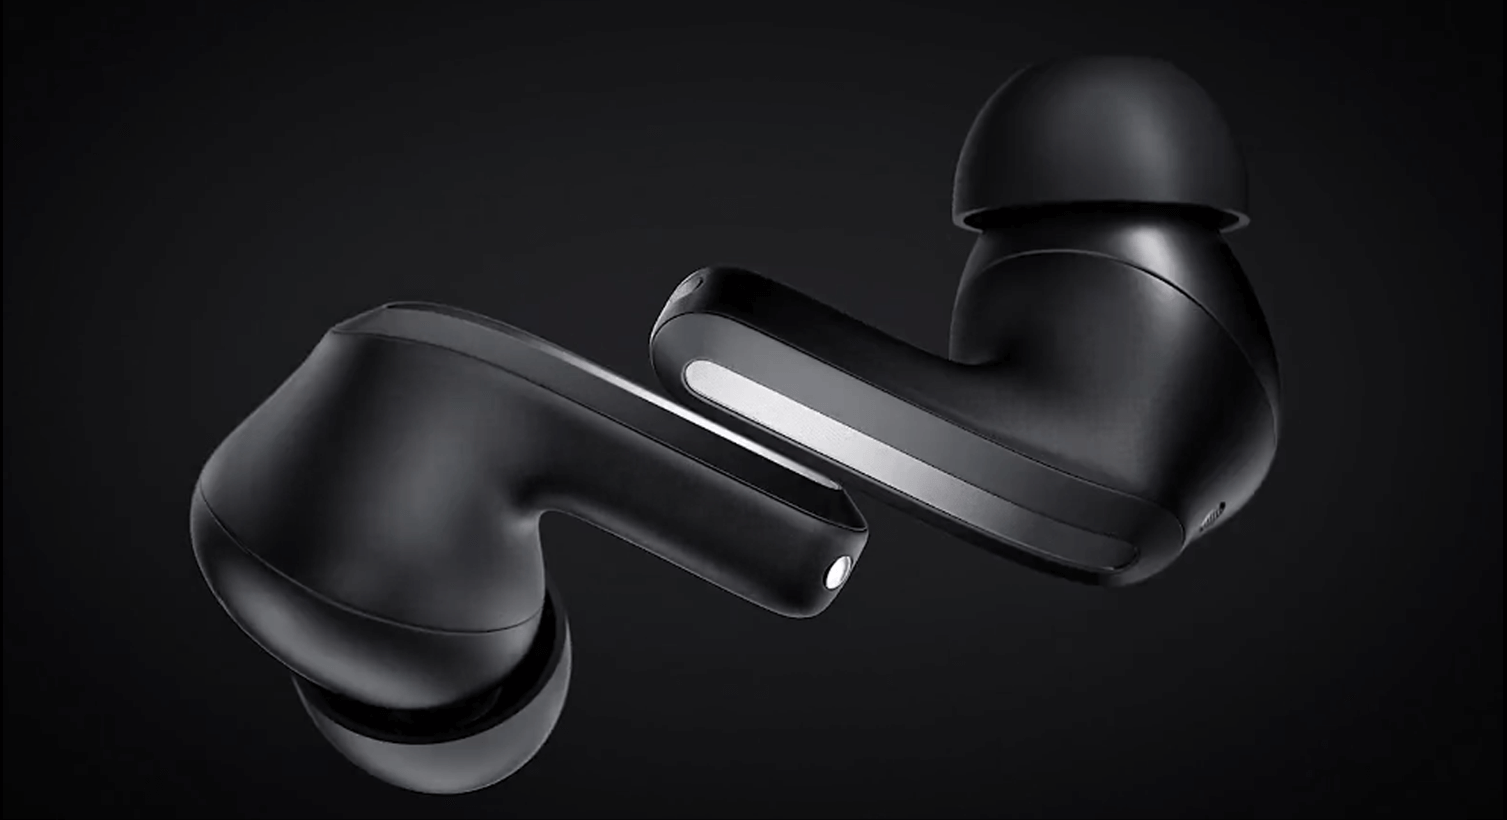 Buy Xiaomi Buds 4 Pro With Active Noise Cancellation at Best Price In  Pakistan